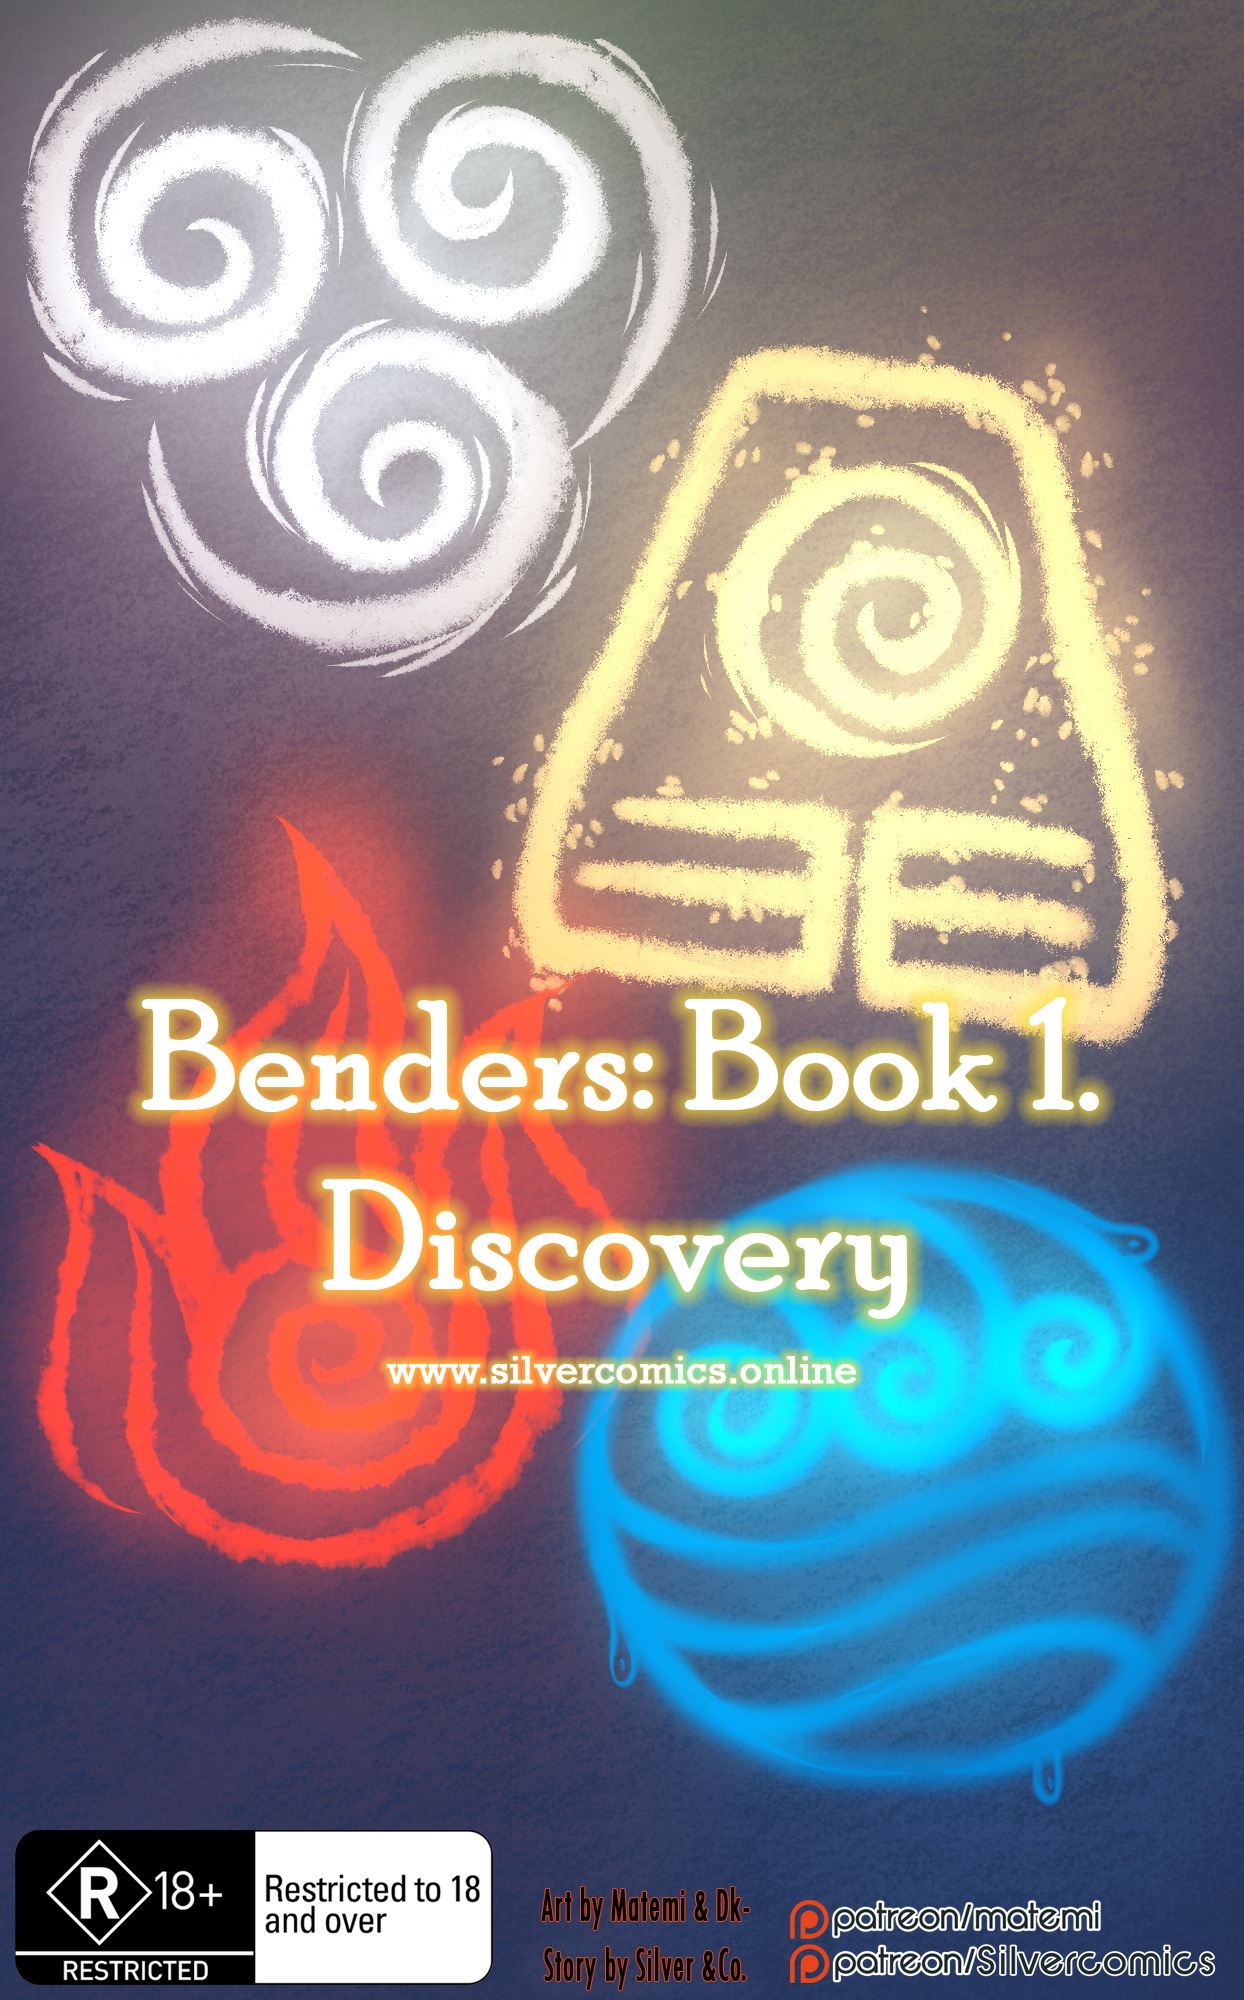 Benders: Book 1. Discovery - Page 1